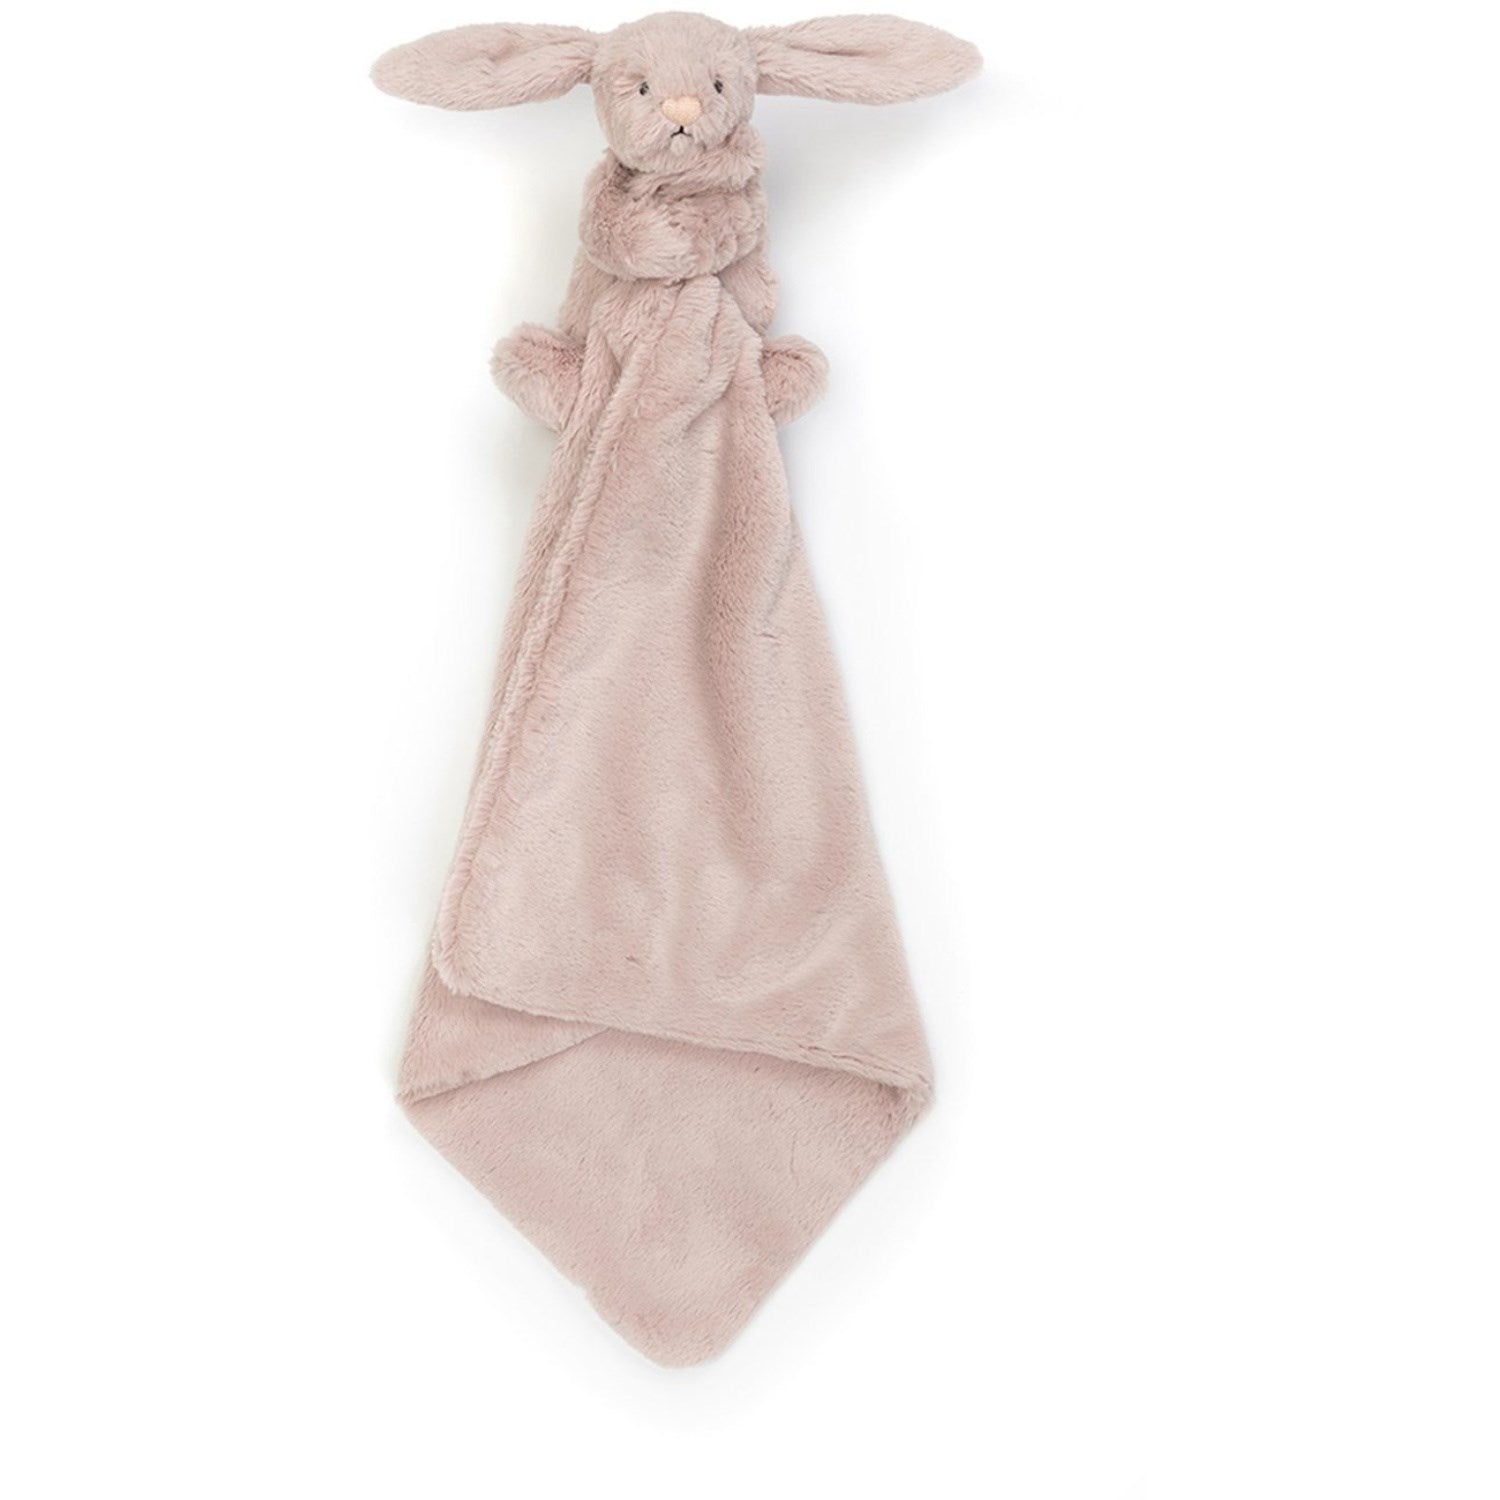   Bashful Luxe Bunny Rosa Soother 2